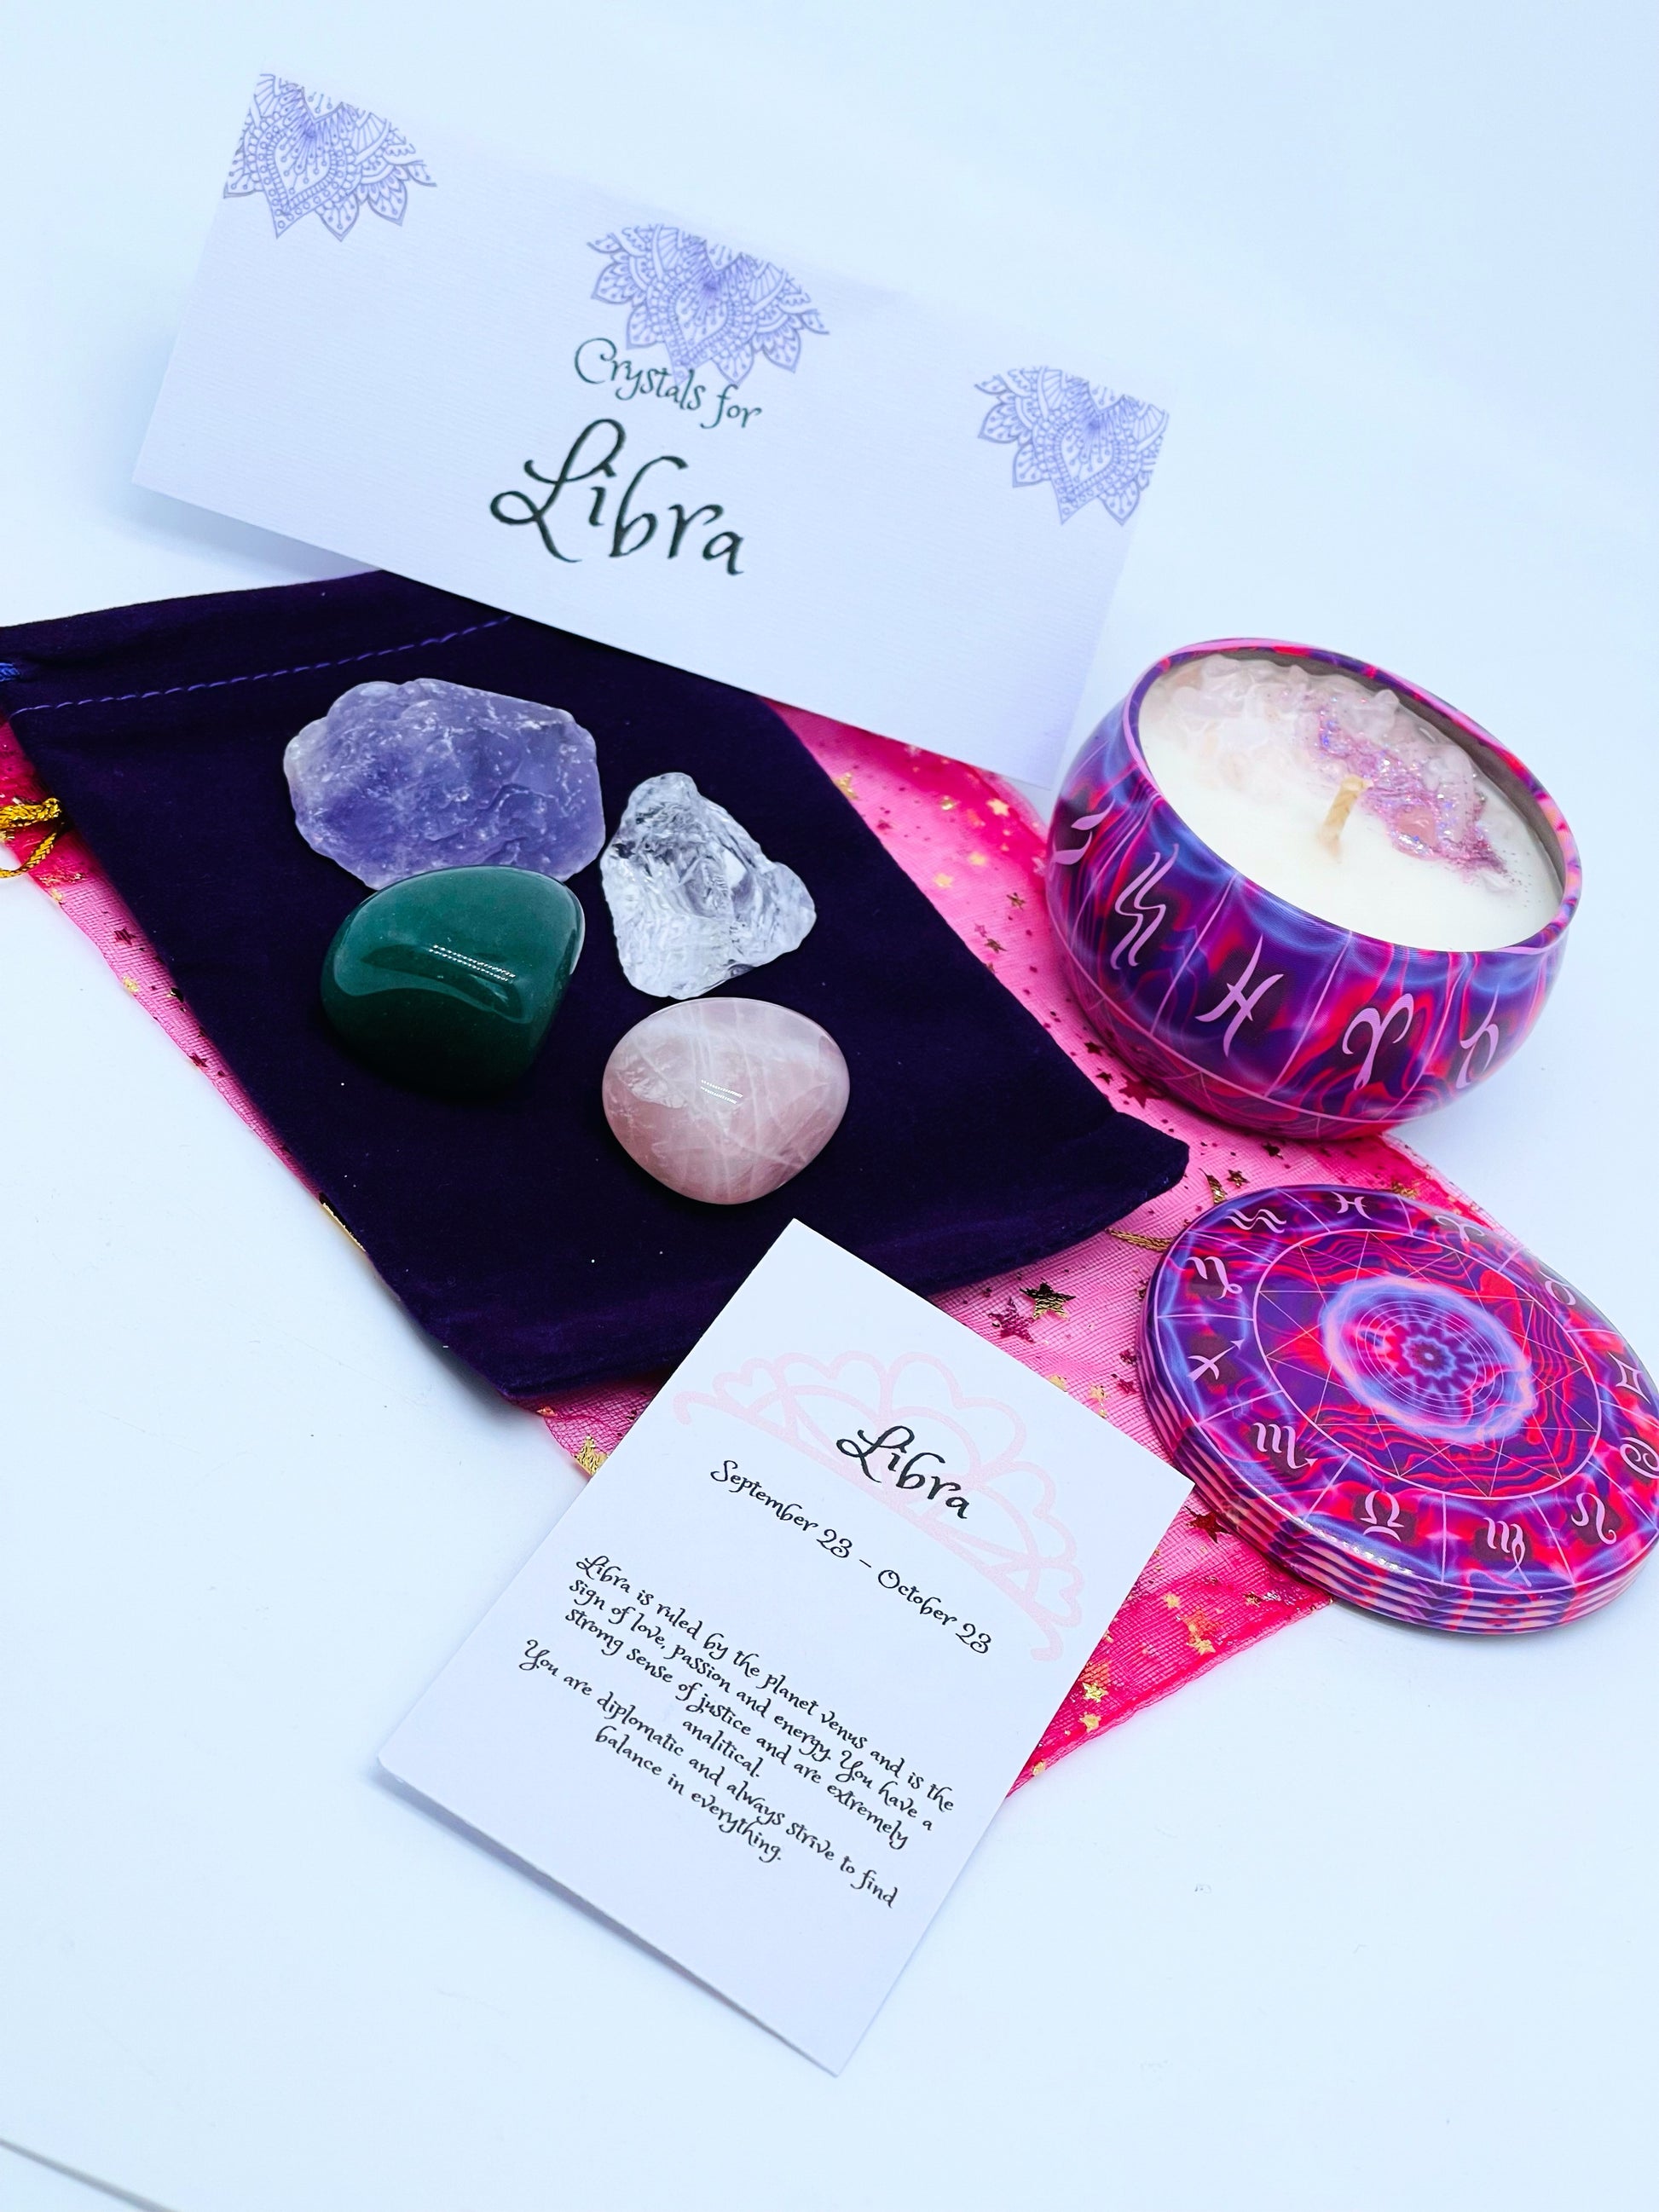 Libra zodiac candle gift set with candle and four crystals for this sign sitting on a velvet bag.